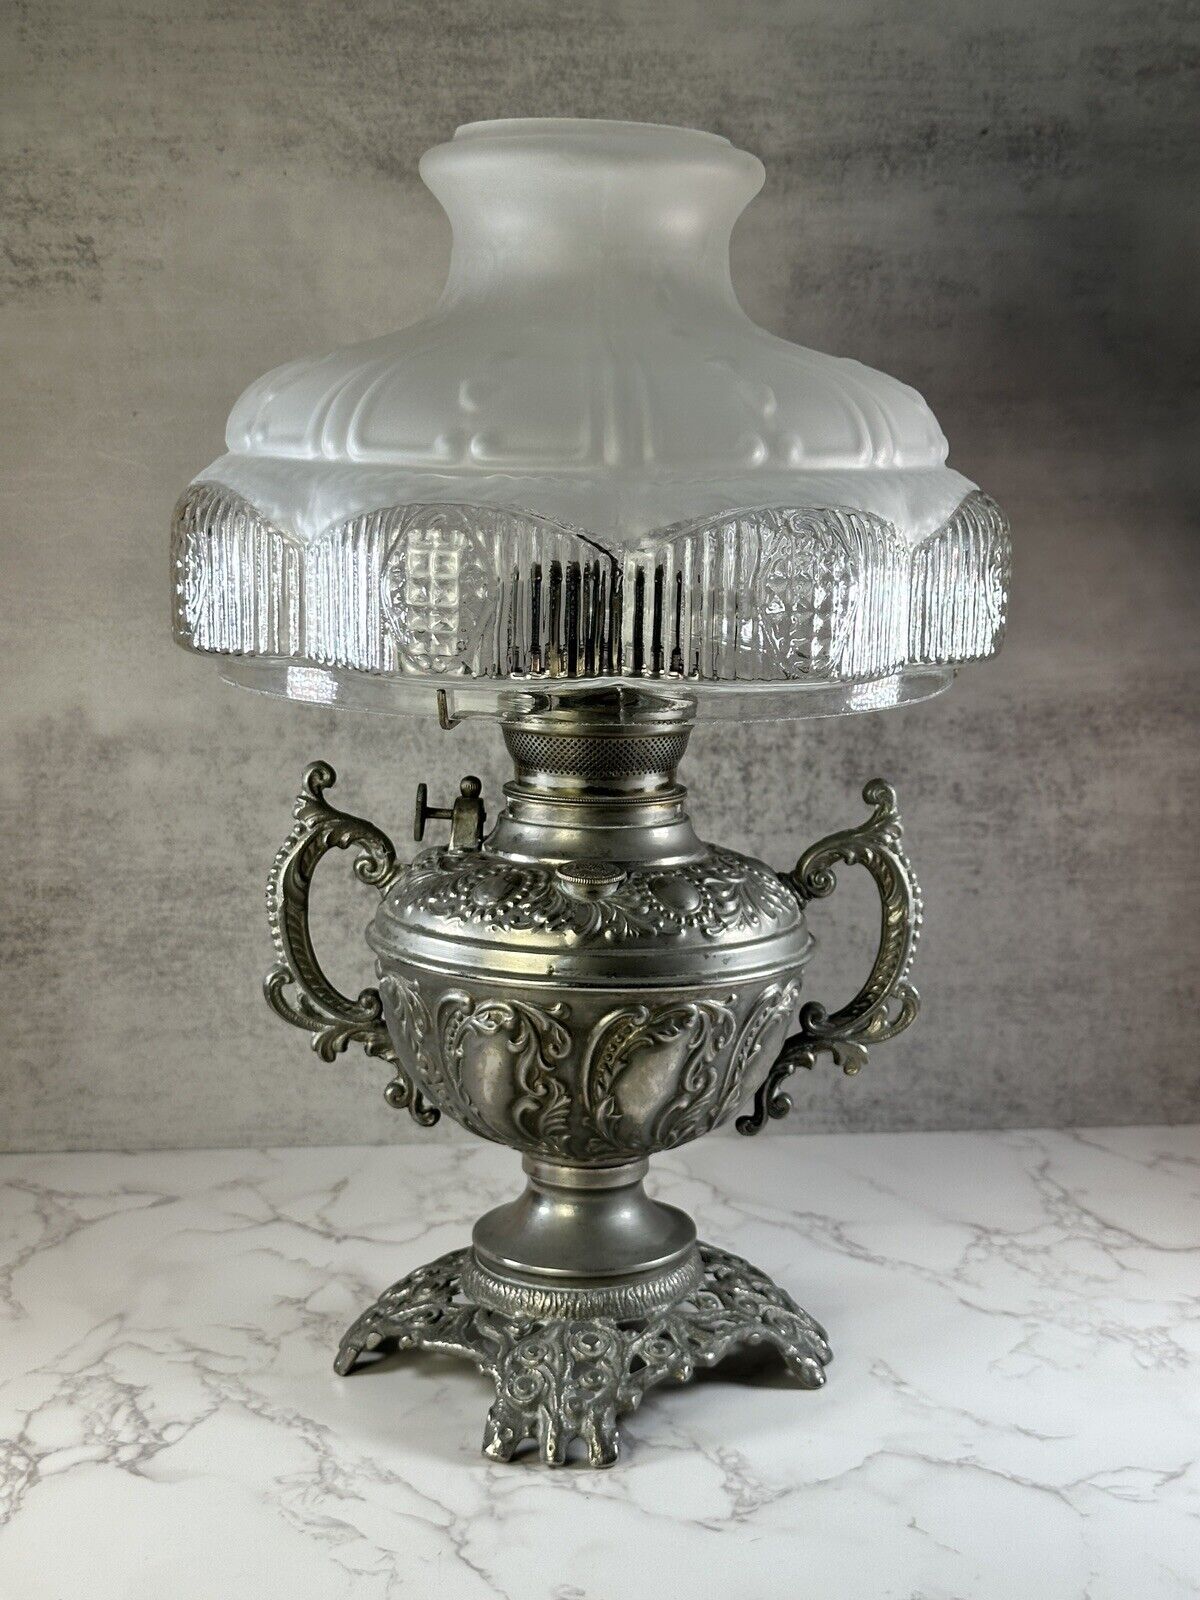 Must See B&H Royal Oil Lamp, Vintage Antique With Original Victorian Glass Shade